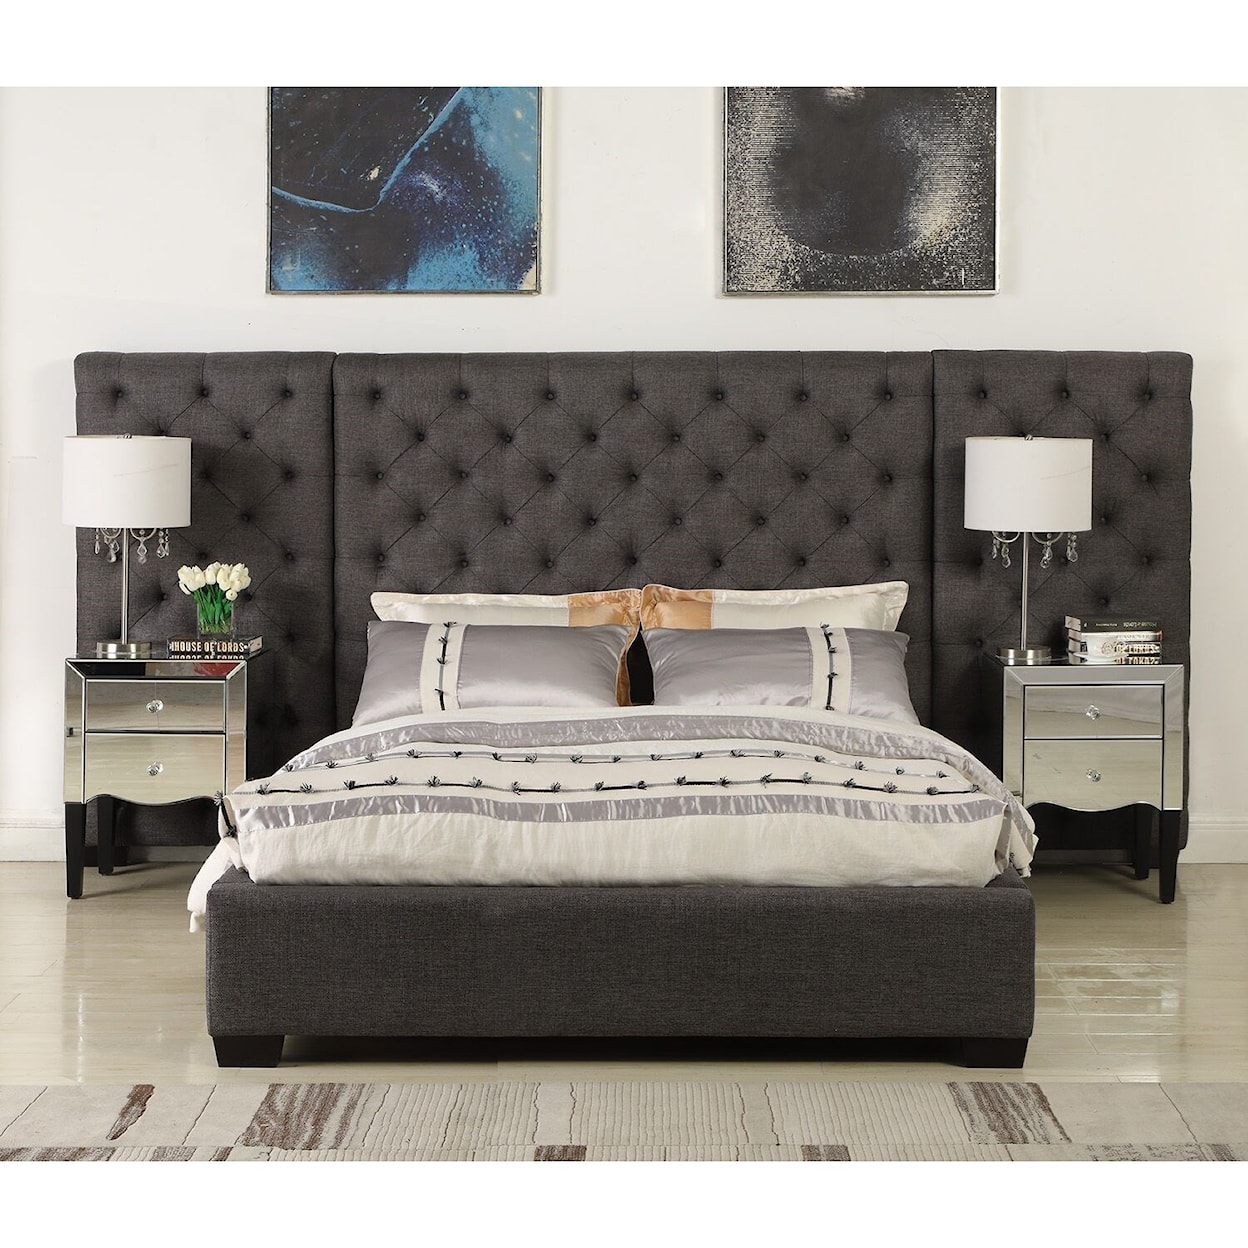 PH Zoey Queen Upholstered Bed with Side Panels